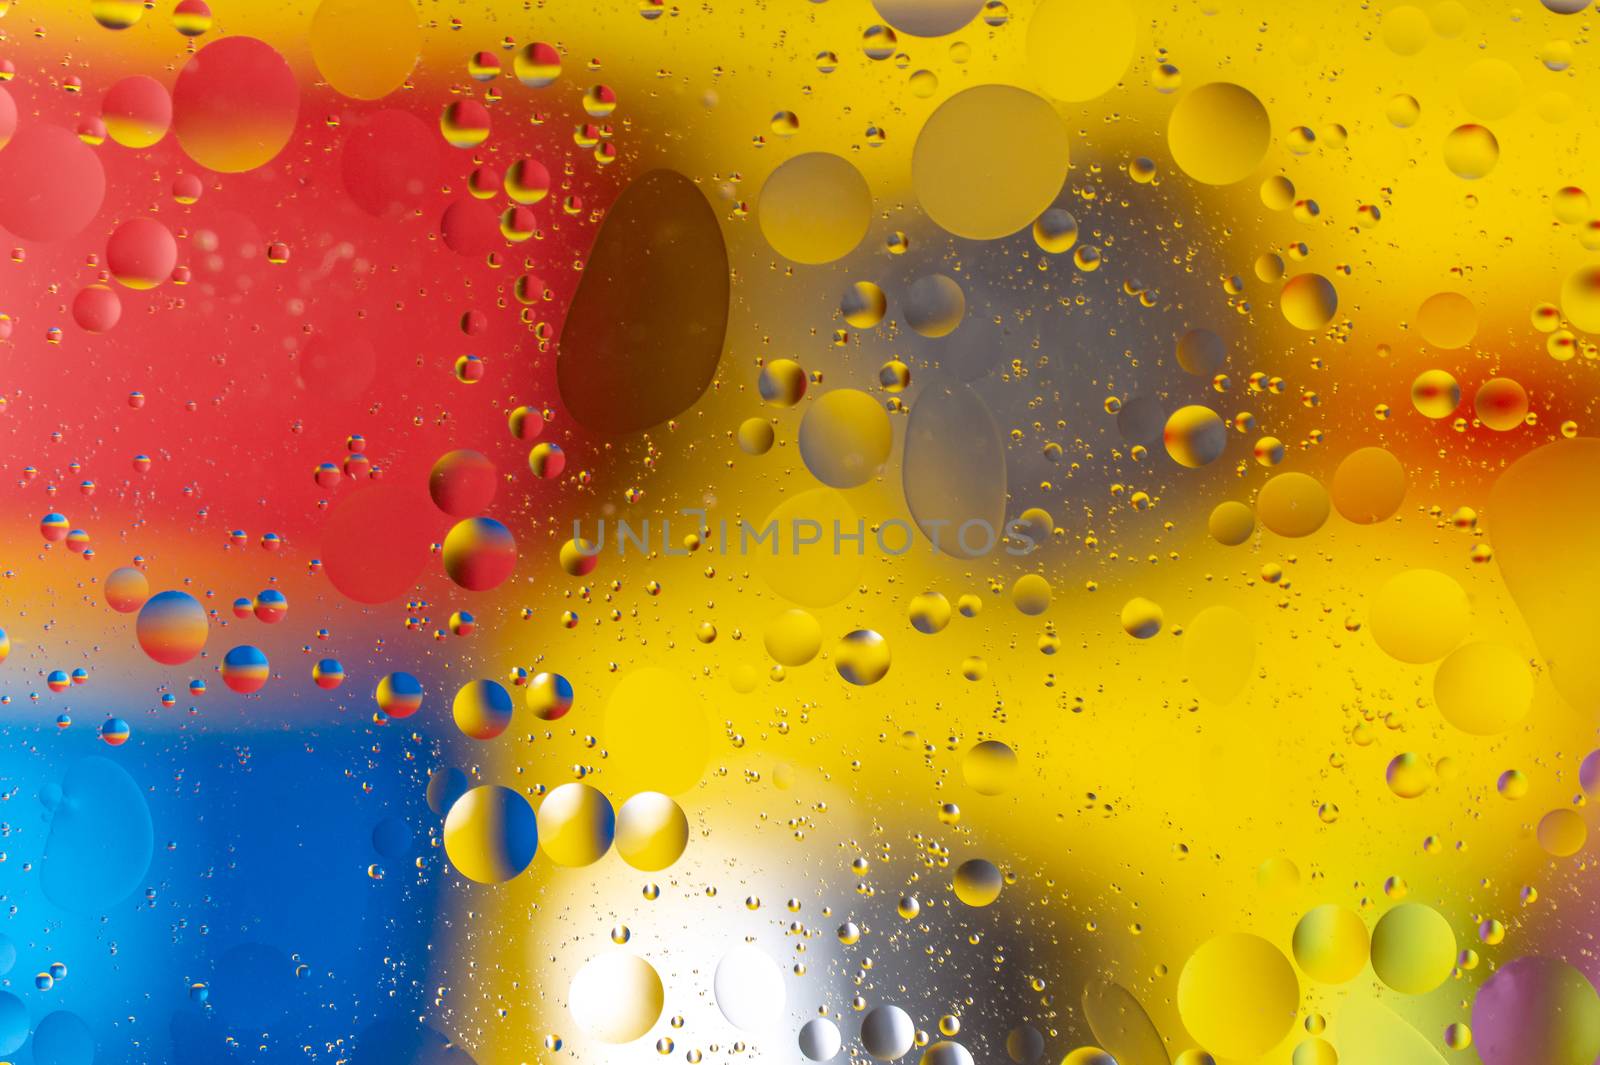 The abstract composition with oil drops in water. A lot of round drops.